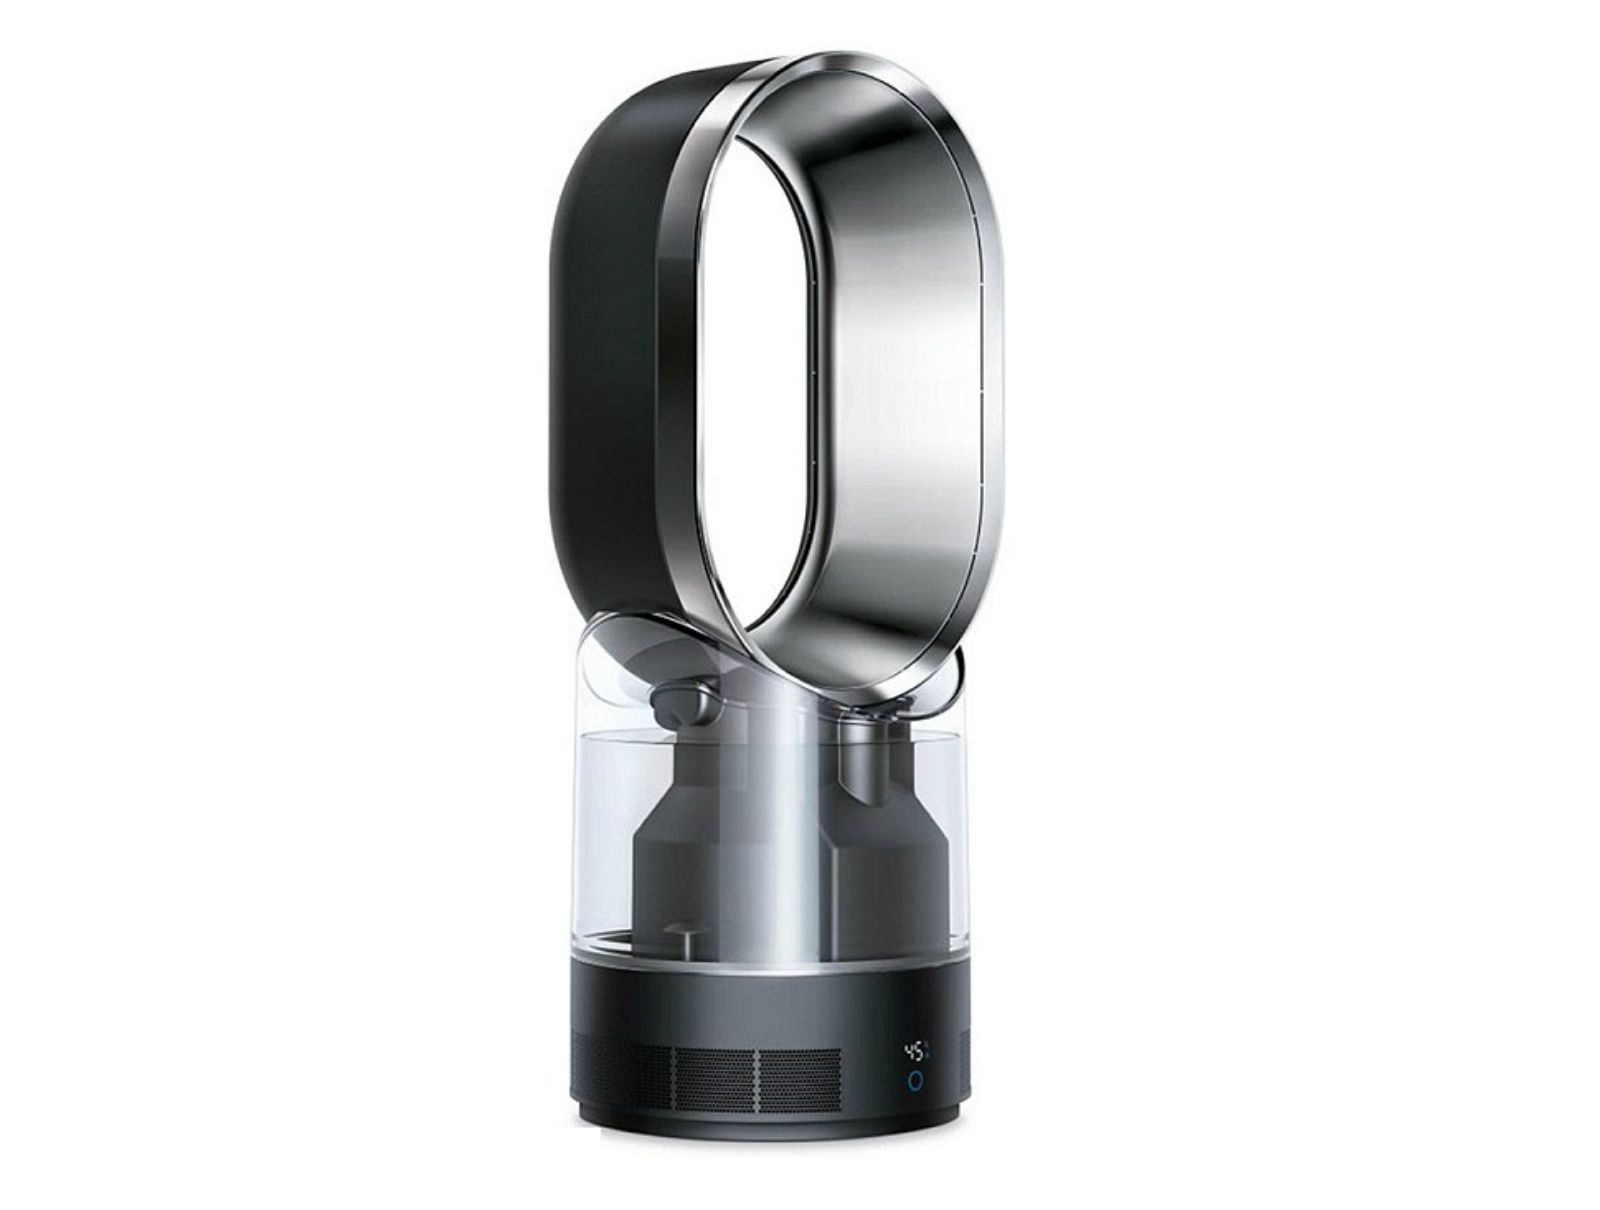 dyson s first air multiplier humidifer has ultraviolet light that kills most bacteria image 1